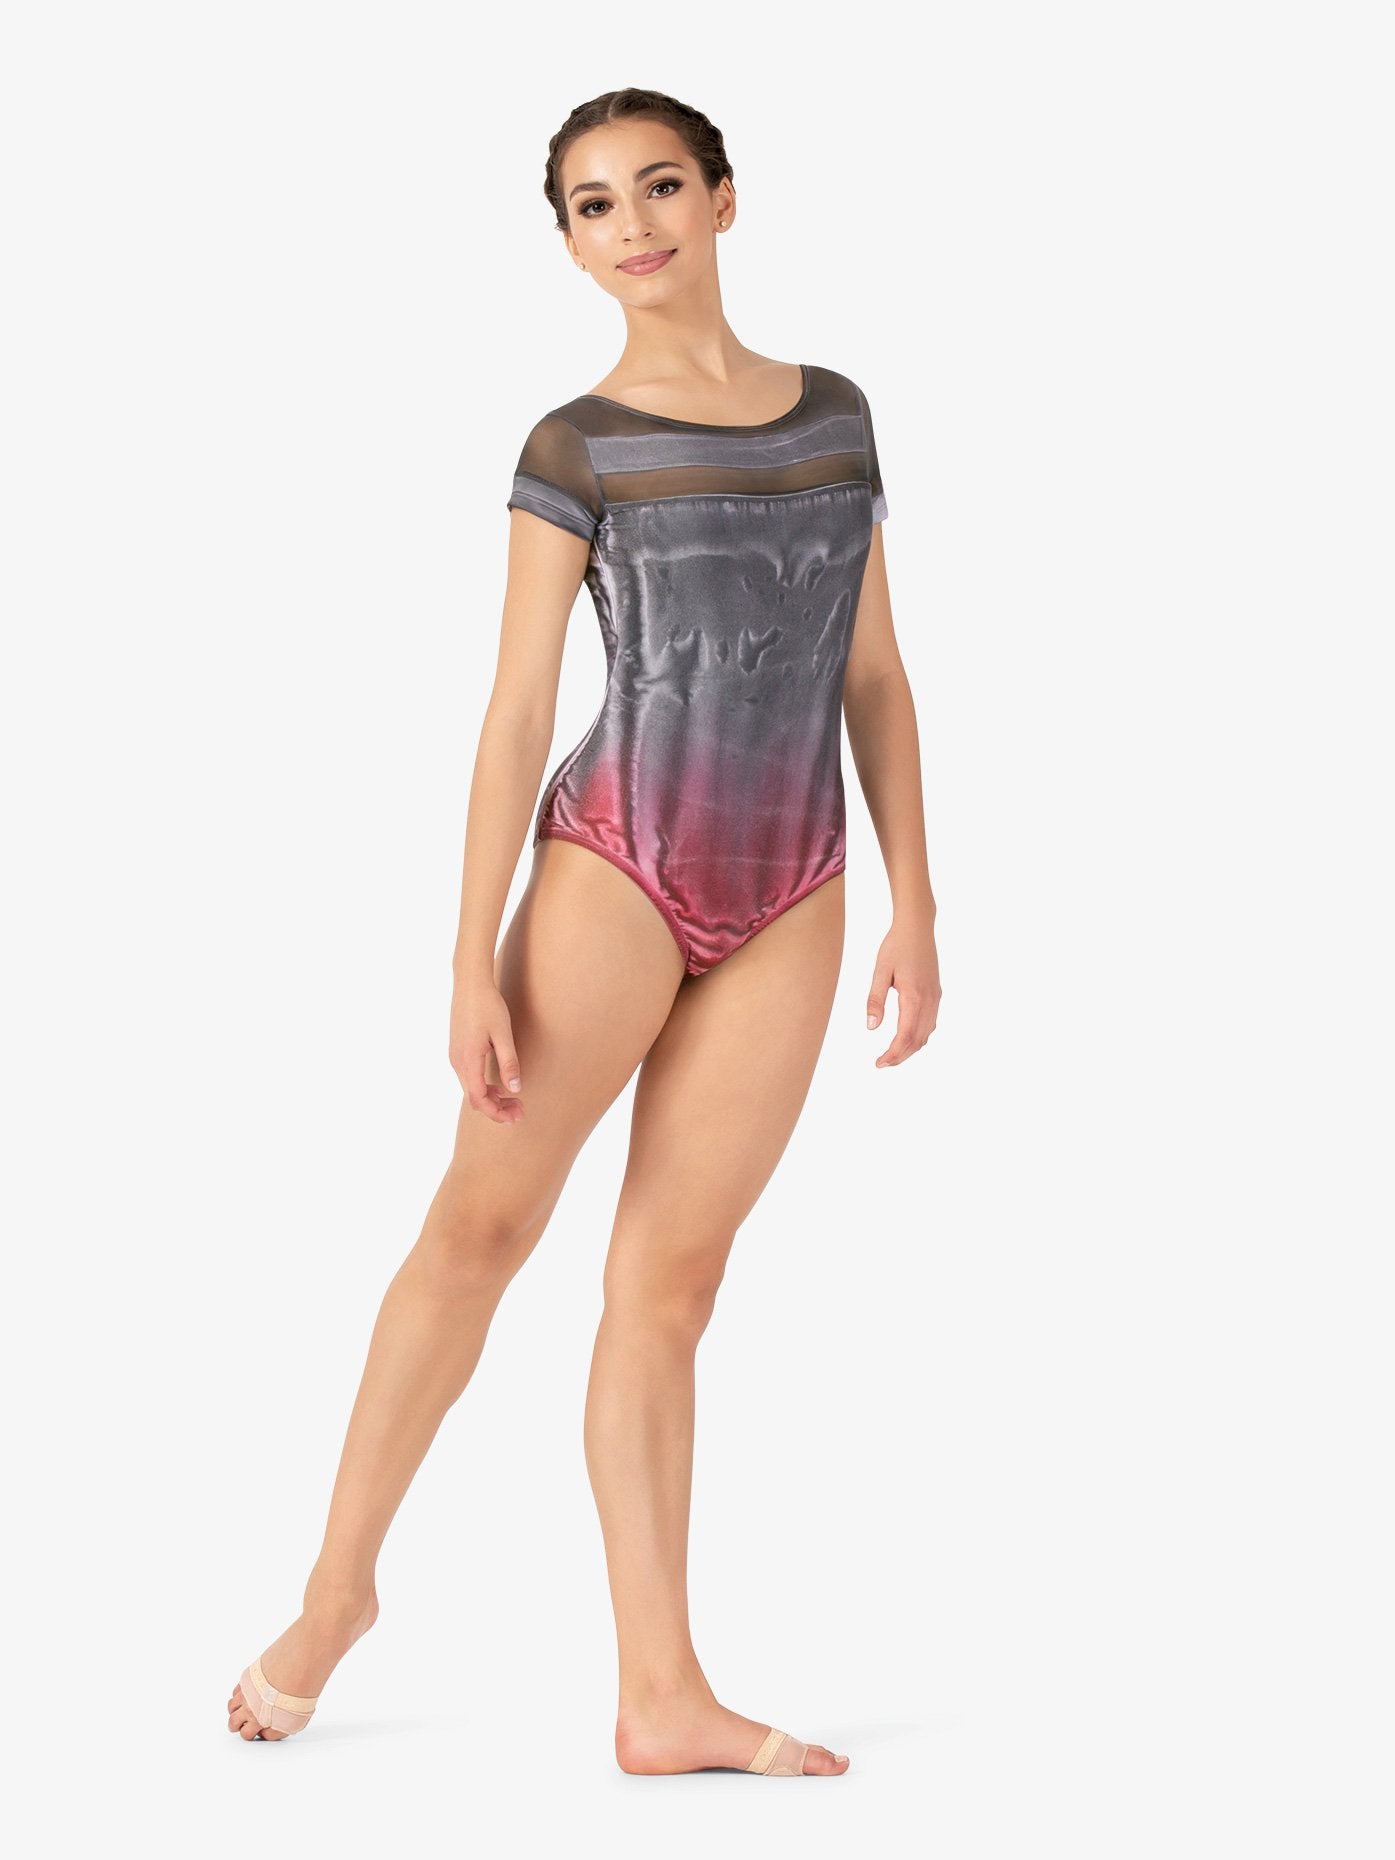 Hand-painted grey and pink women's short sleeve leotard